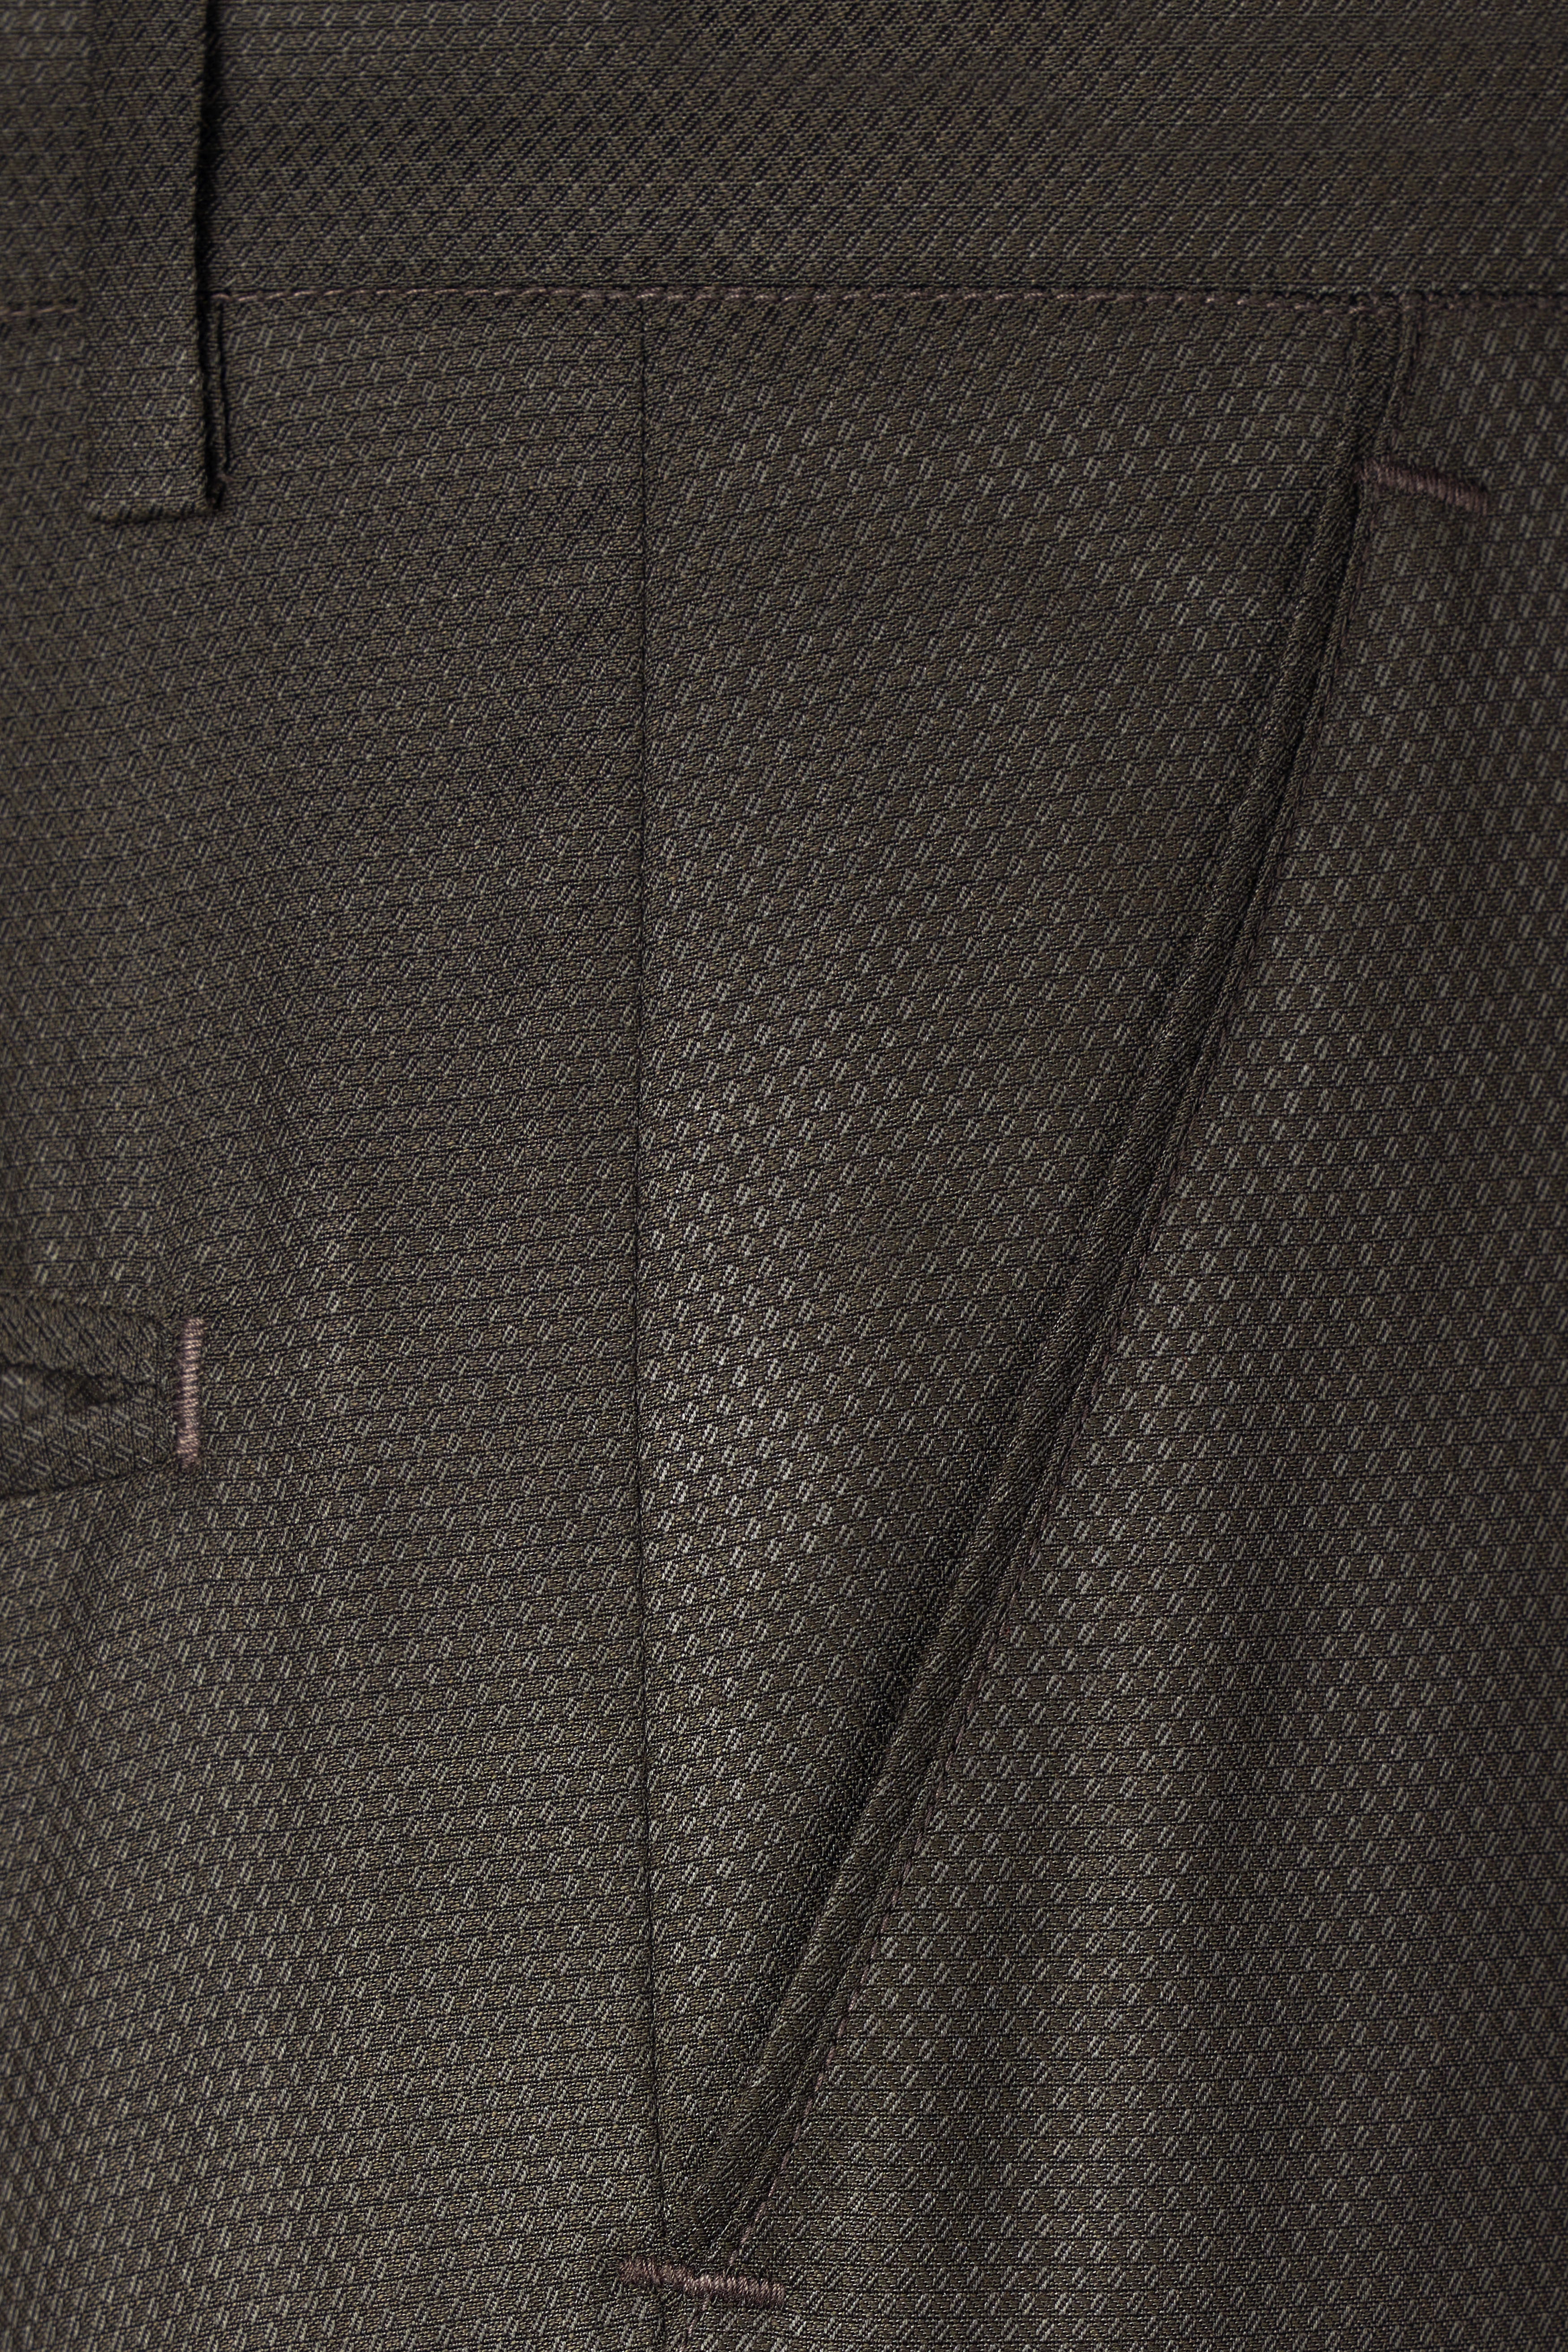 Merline Dark Brown Dobby Textured Double Breasted Suit